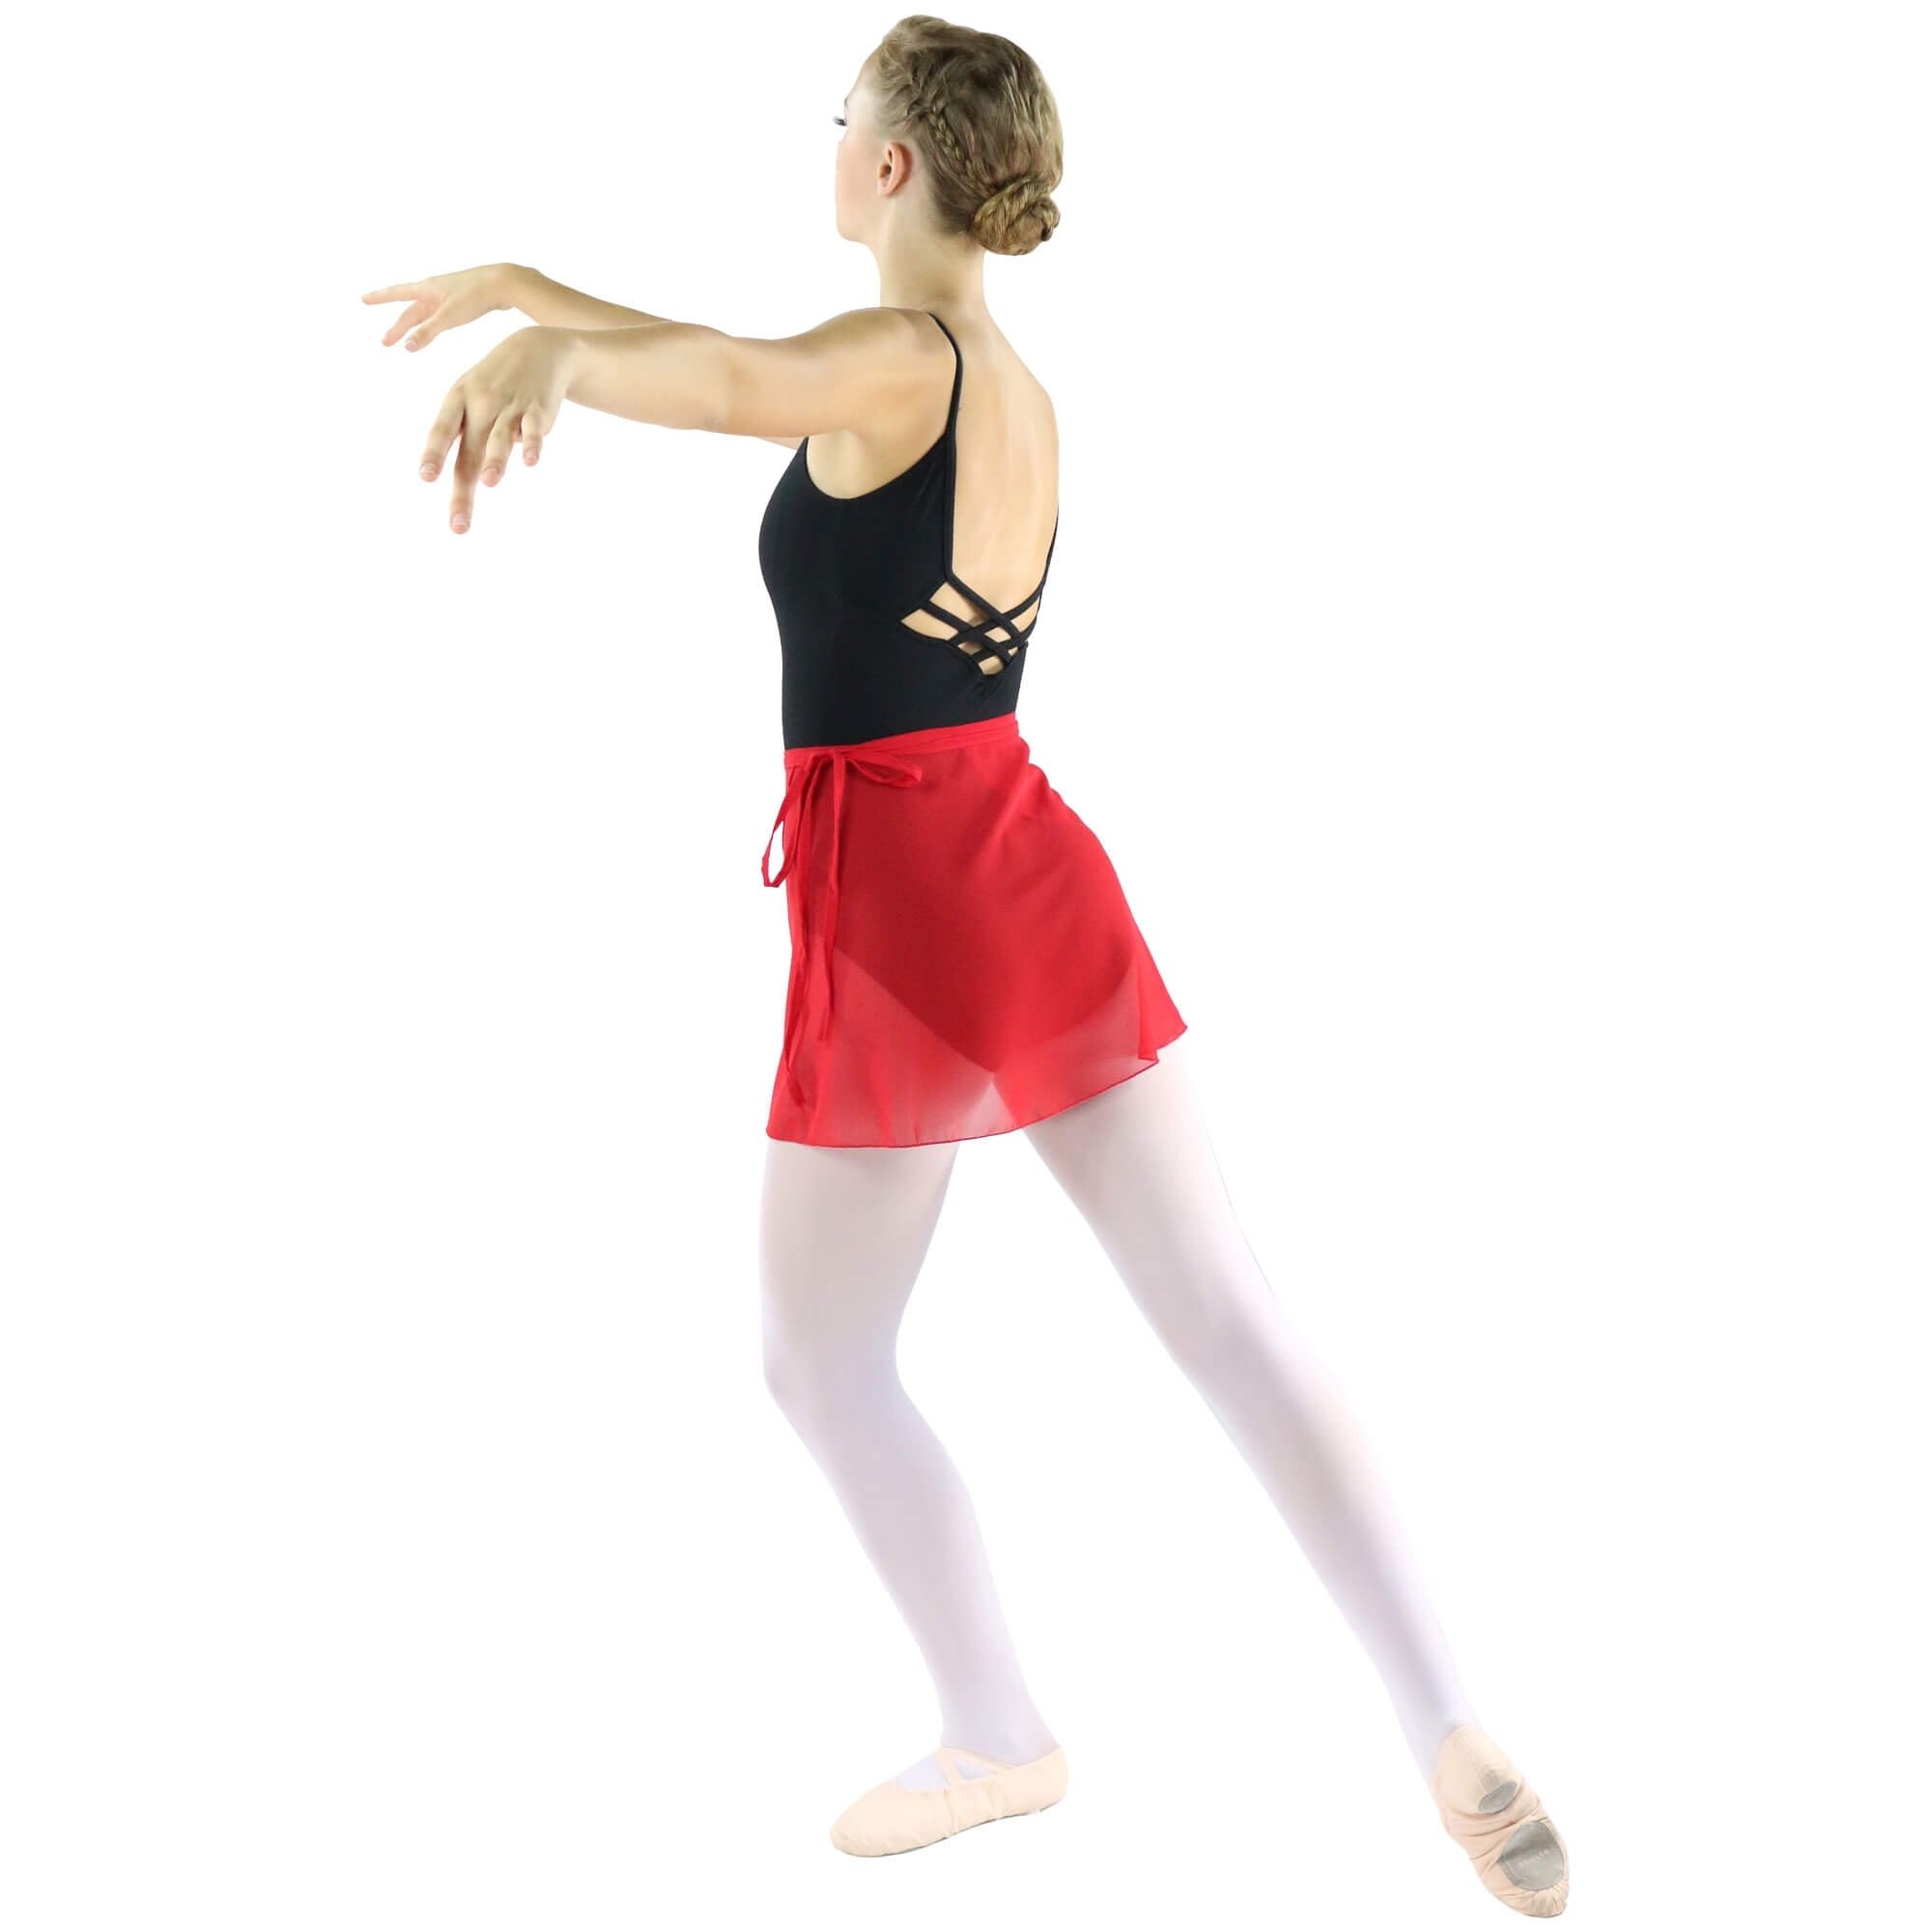 Danzcue Adult Ballet Dance Wrap Skirt - Click Image to Close